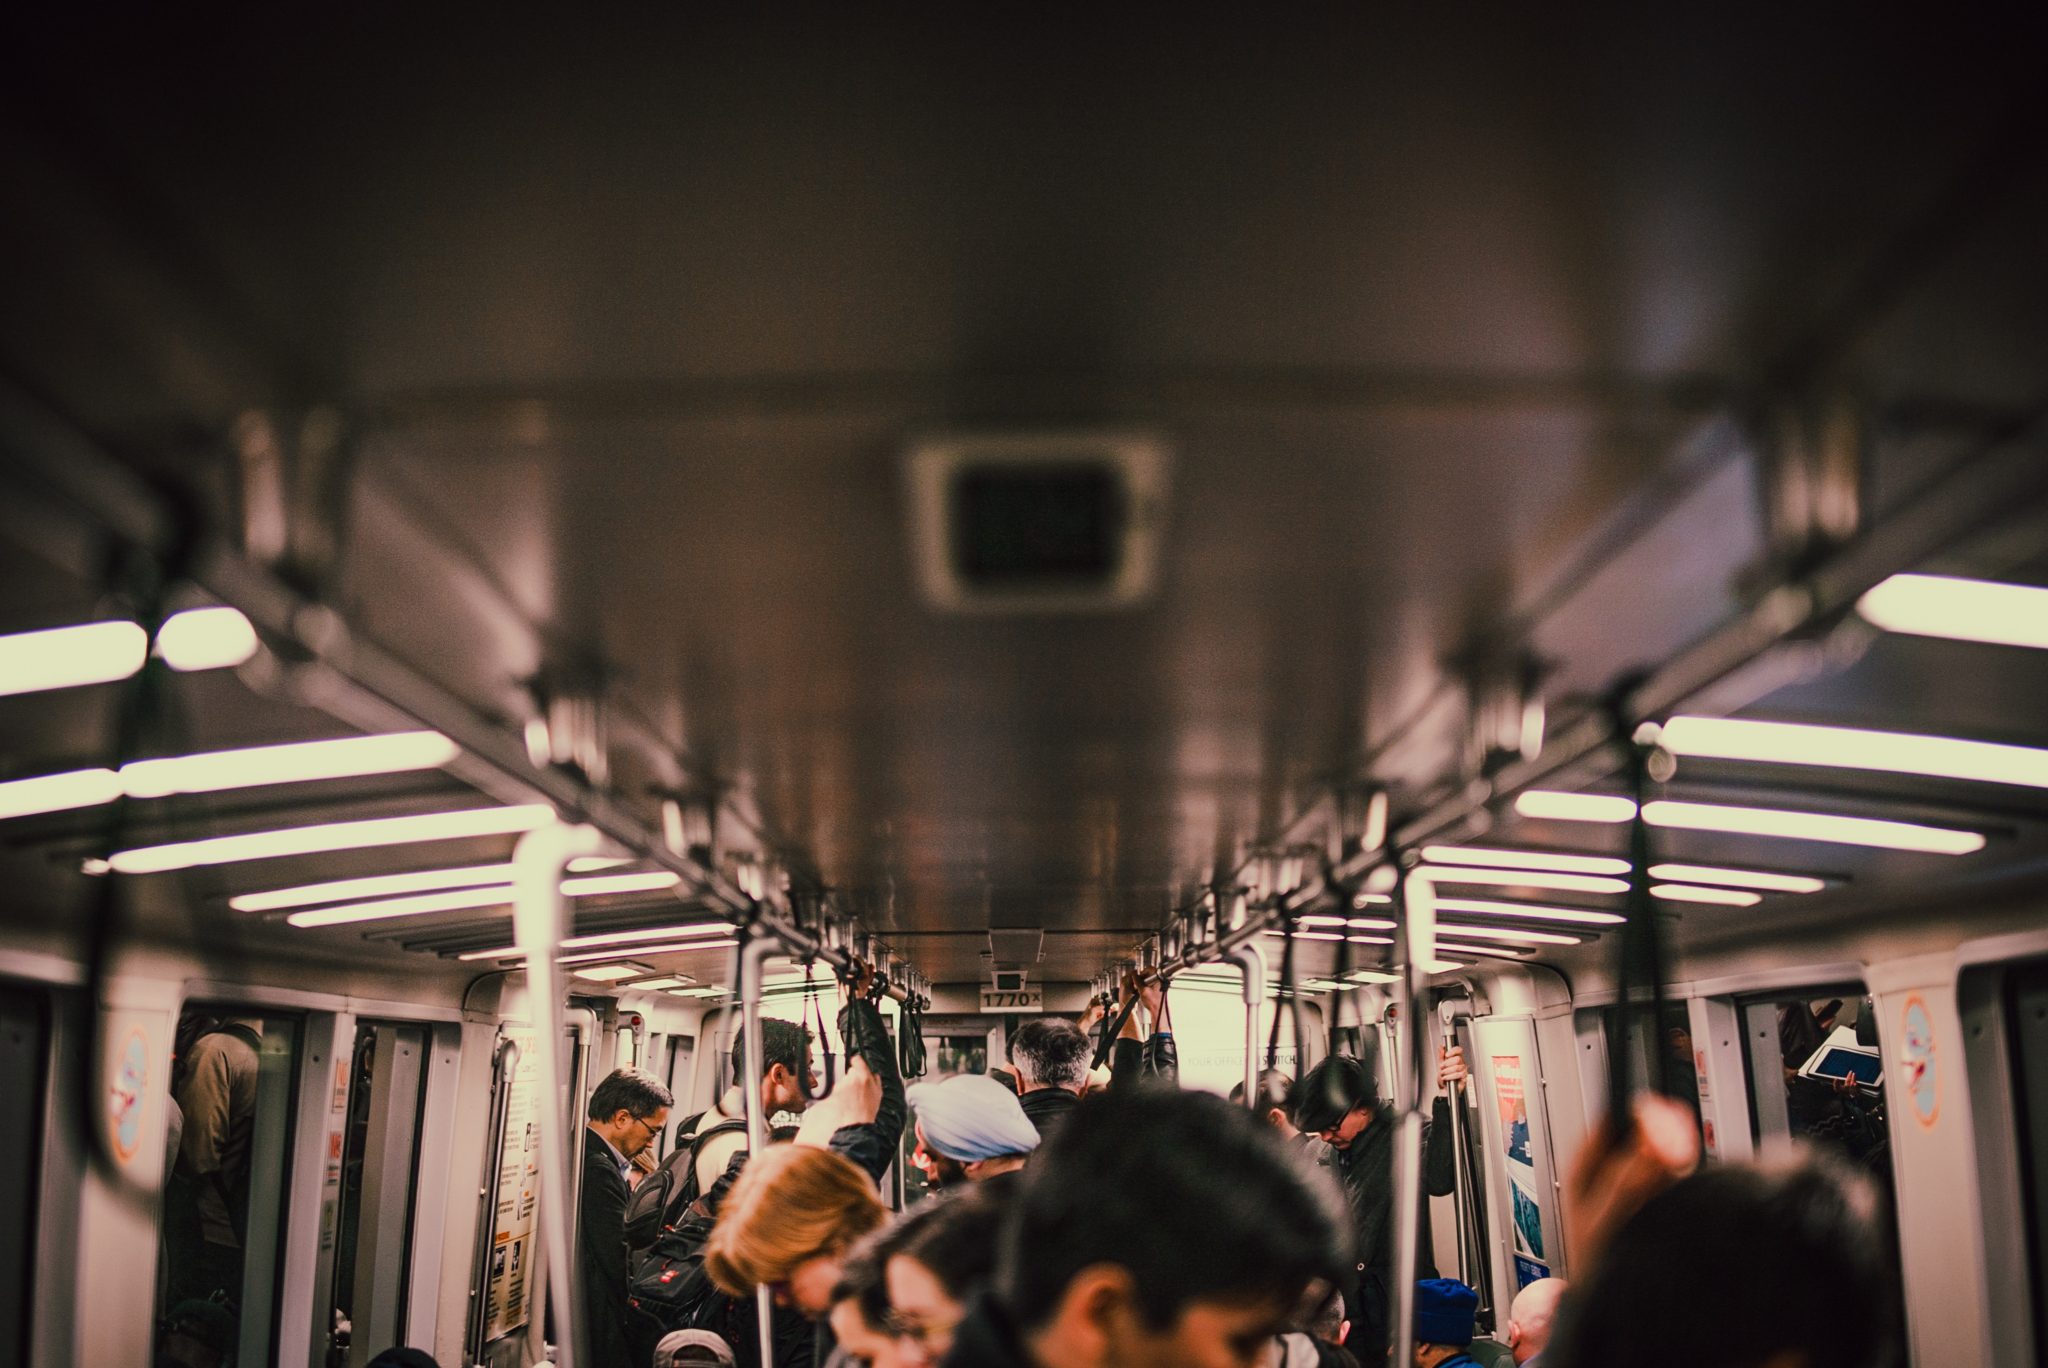 Commute on a crowded subway train